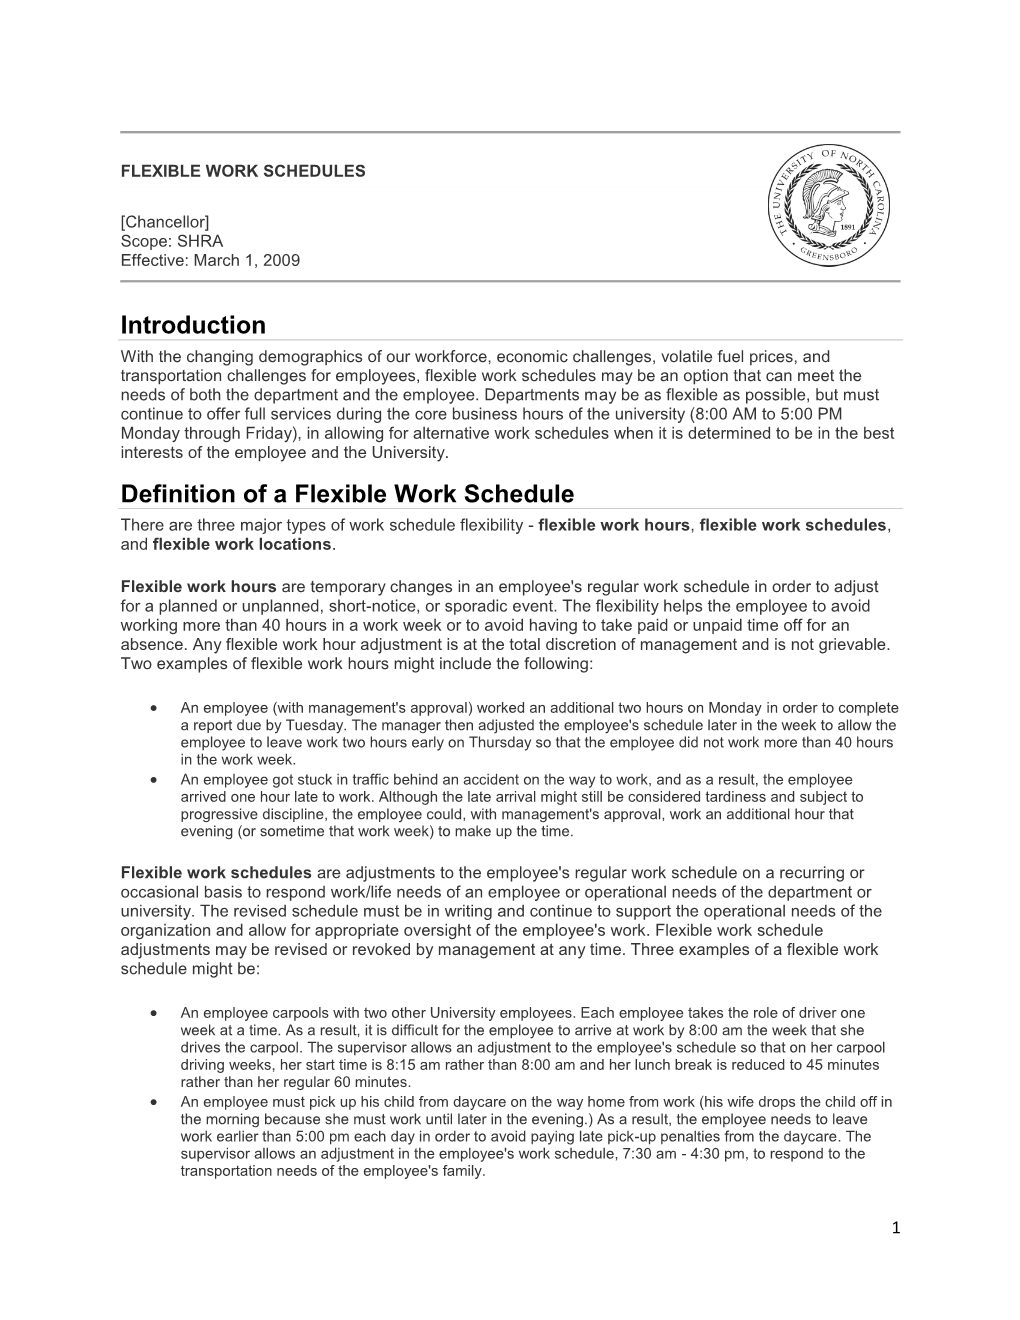 Introduction Definition of a Flexible Work Schedule